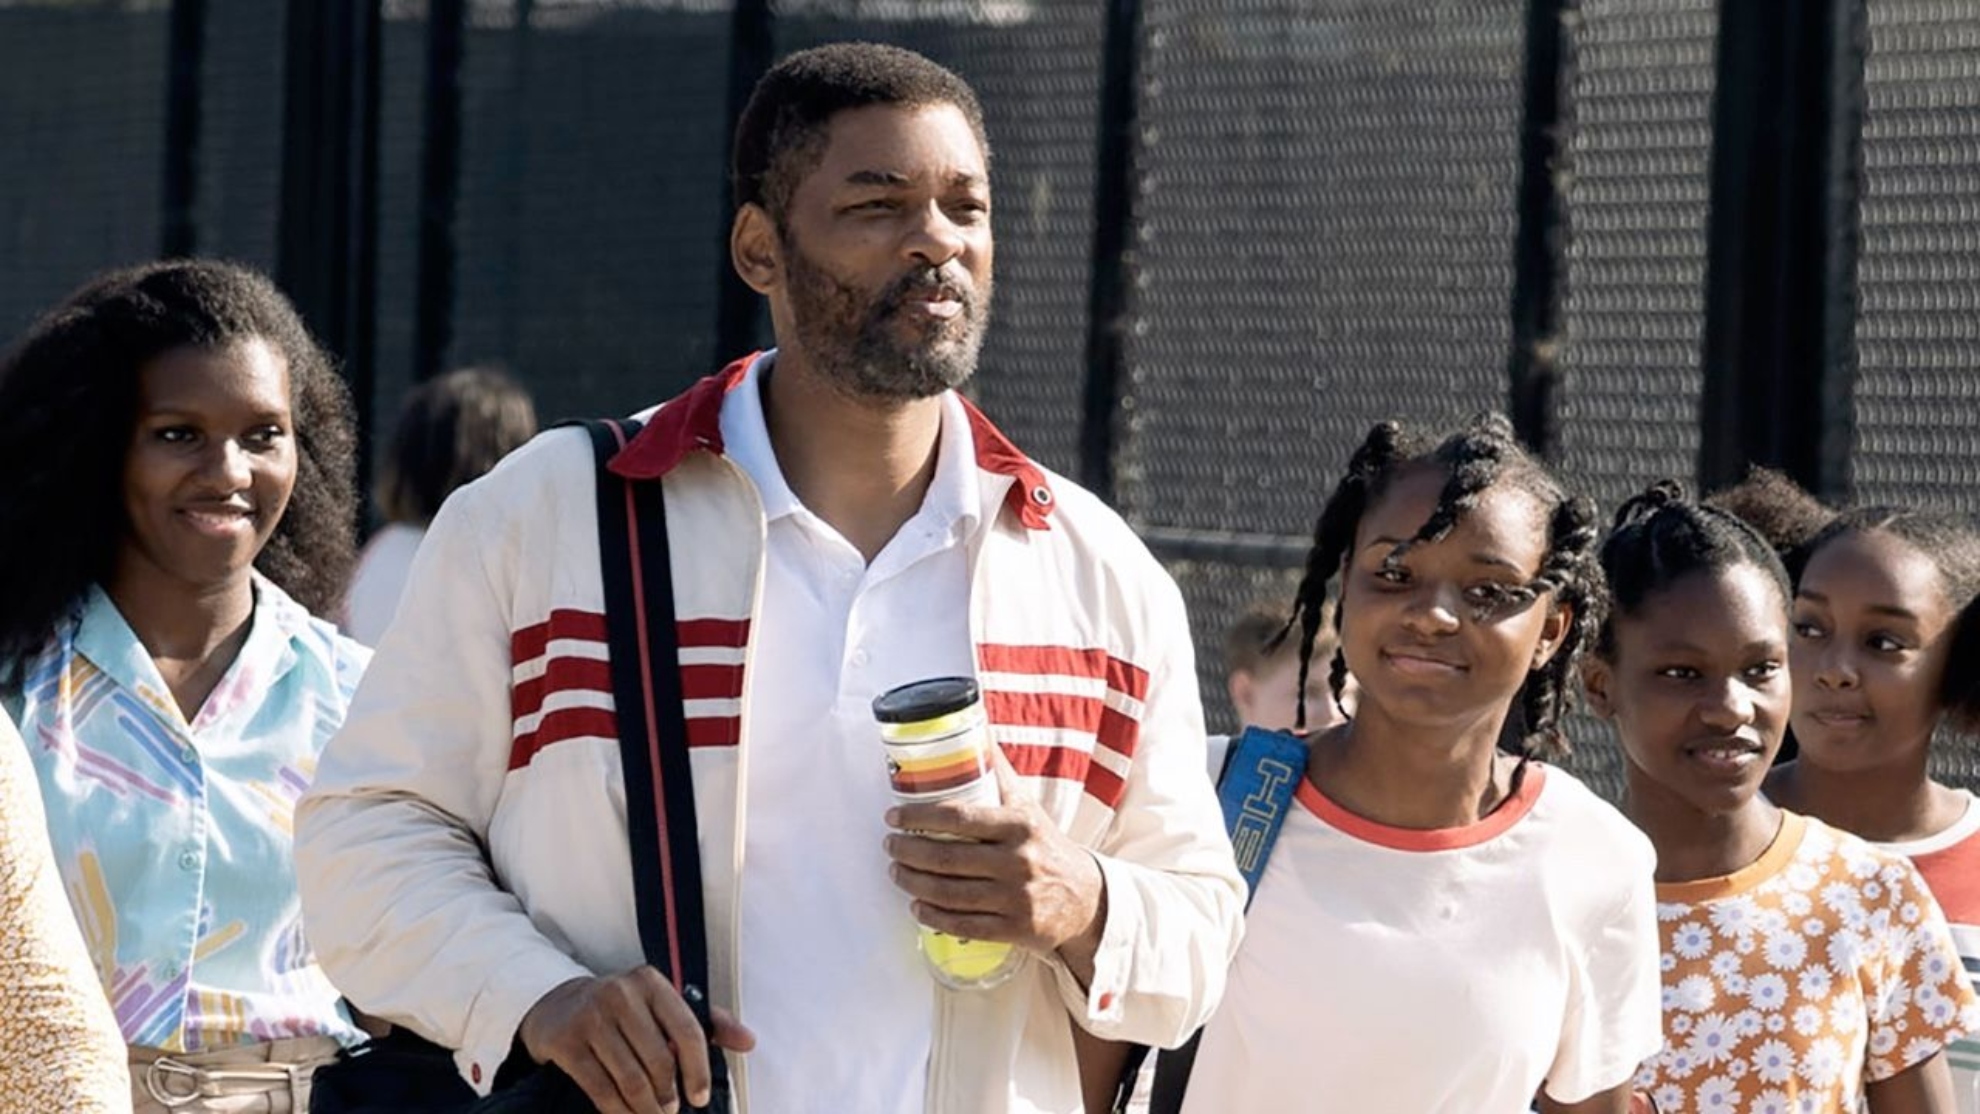 King Richard': Will Smith's approach to the Williams' family journey | Marca